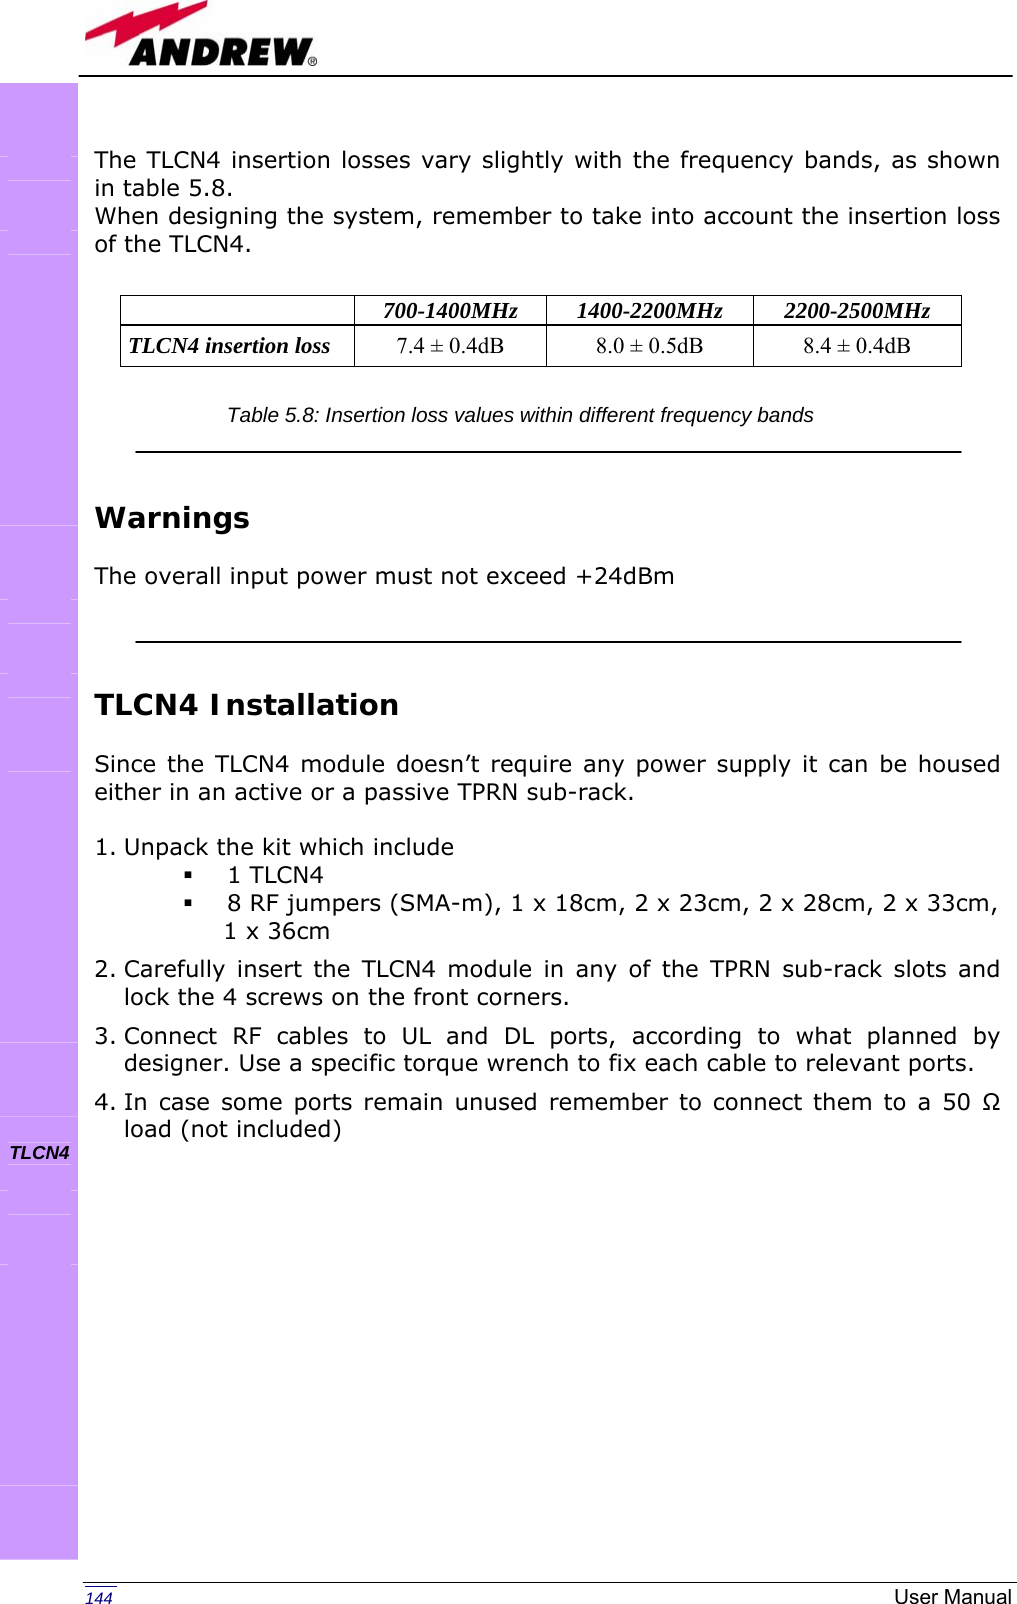   144  User Manual The TLCN4 insertion losses vary slightly with the frequency bands, as shown in table 5.8. When designing the system, remember to take into account the insertion loss of the TLCN4.      Warnings  The overall input power must not exceed +24dBm    TLCN4 Installation  Since the TLCN4 module doesn’t require any power supply it can be housed either in an active or a passive TPRN sub-rack.  1. Unpack the kit which include  1 TLCN4  8 RF jumpers (SMA-m), 1 x 18cm, 2 x 23cm, 2 x 28cm, 2 x 33cm,                 1 x 36cm 2. Carefully insert the TLCN4 module in any of the TPRN sub-rack slots and lock the 4 screws on the front corners. 3. Connect RF cables to UL and DL ports, according to what planned by designer. Use a specific torque wrench to fix each cable to relevant ports. 4. In case some ports remain unused remember to connect them to a 50 Ω load (not included)  700-1400MHz 1400-2200MHz 2200-2500MHz TLCN4 insertion loss  7.4 ± 0.4dB  8.0 ± 0.5dB  8.4 ± 0.4dB               TLCN4      Table 5.8: Insertion loss values within different frequency bands 